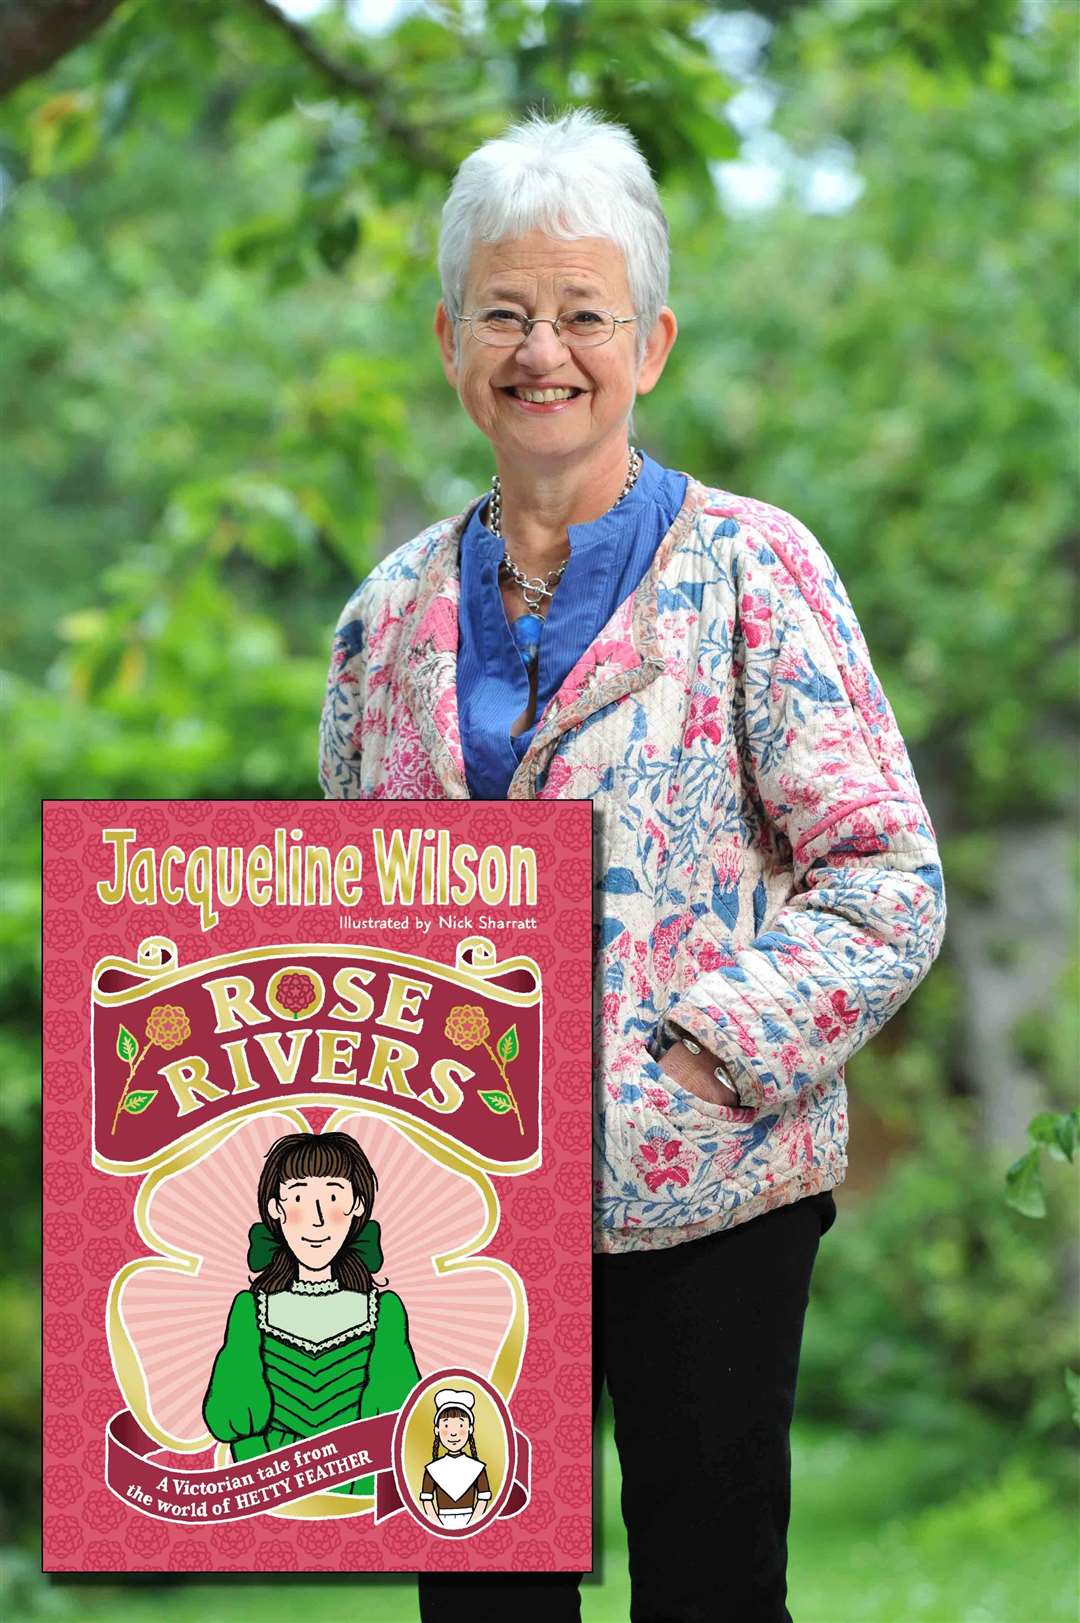 Author Jacqueline Wilson's new book, Rose Rivers